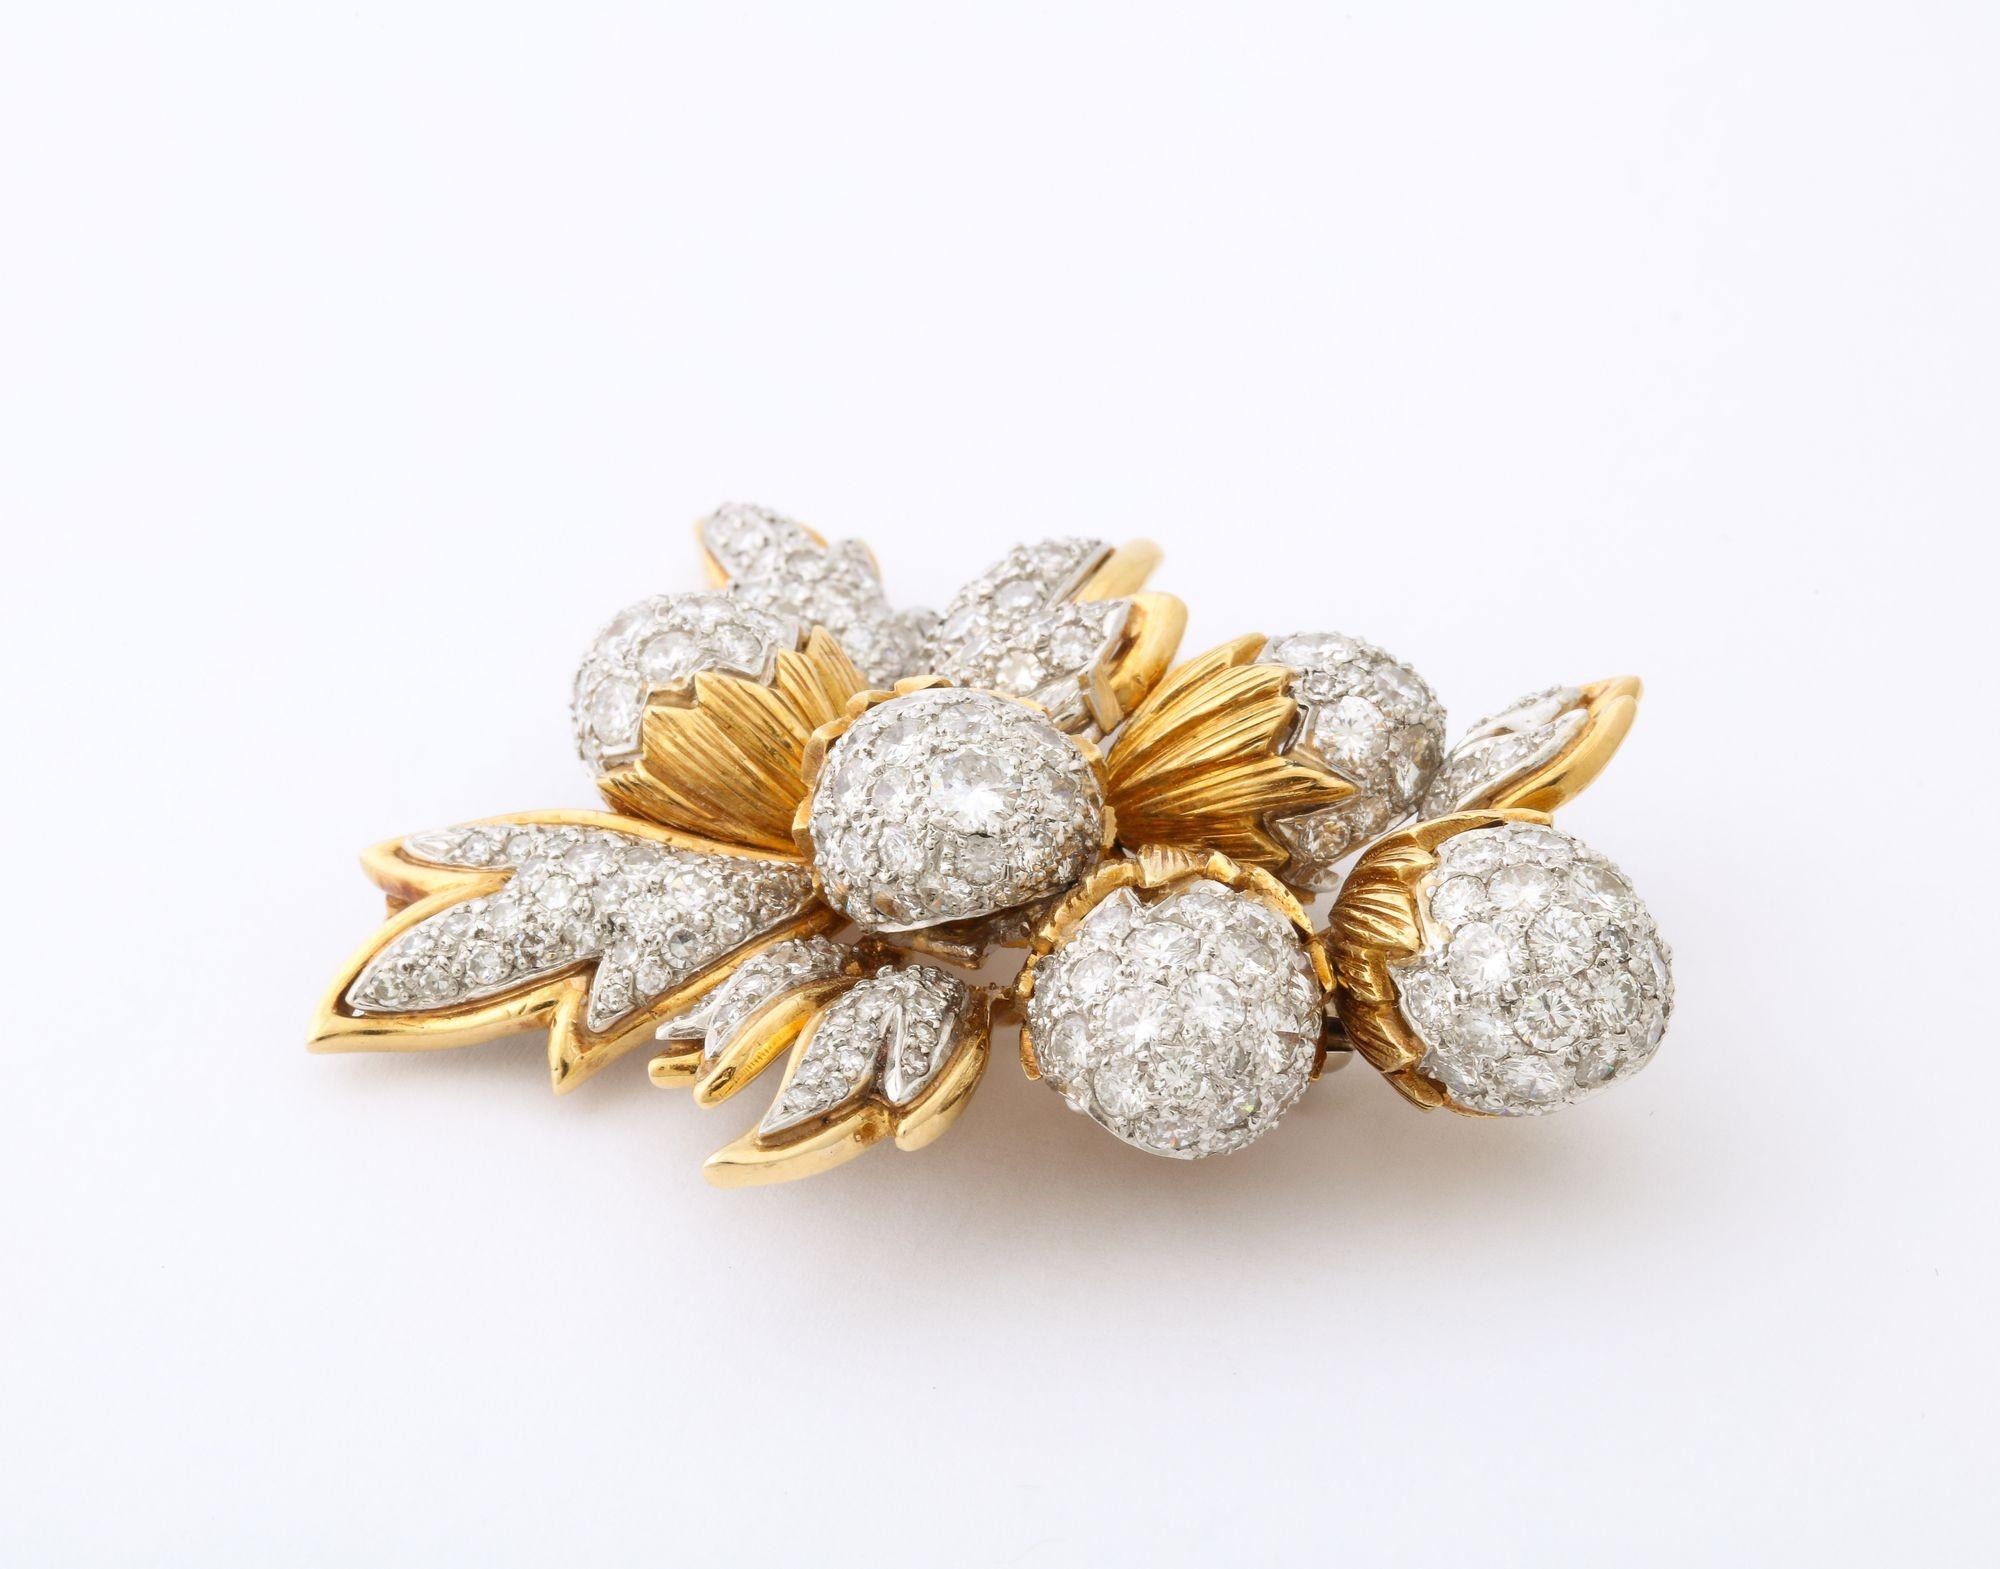 18K Gold and Platinum Brooch with Diamond Acorns and Leaves 2